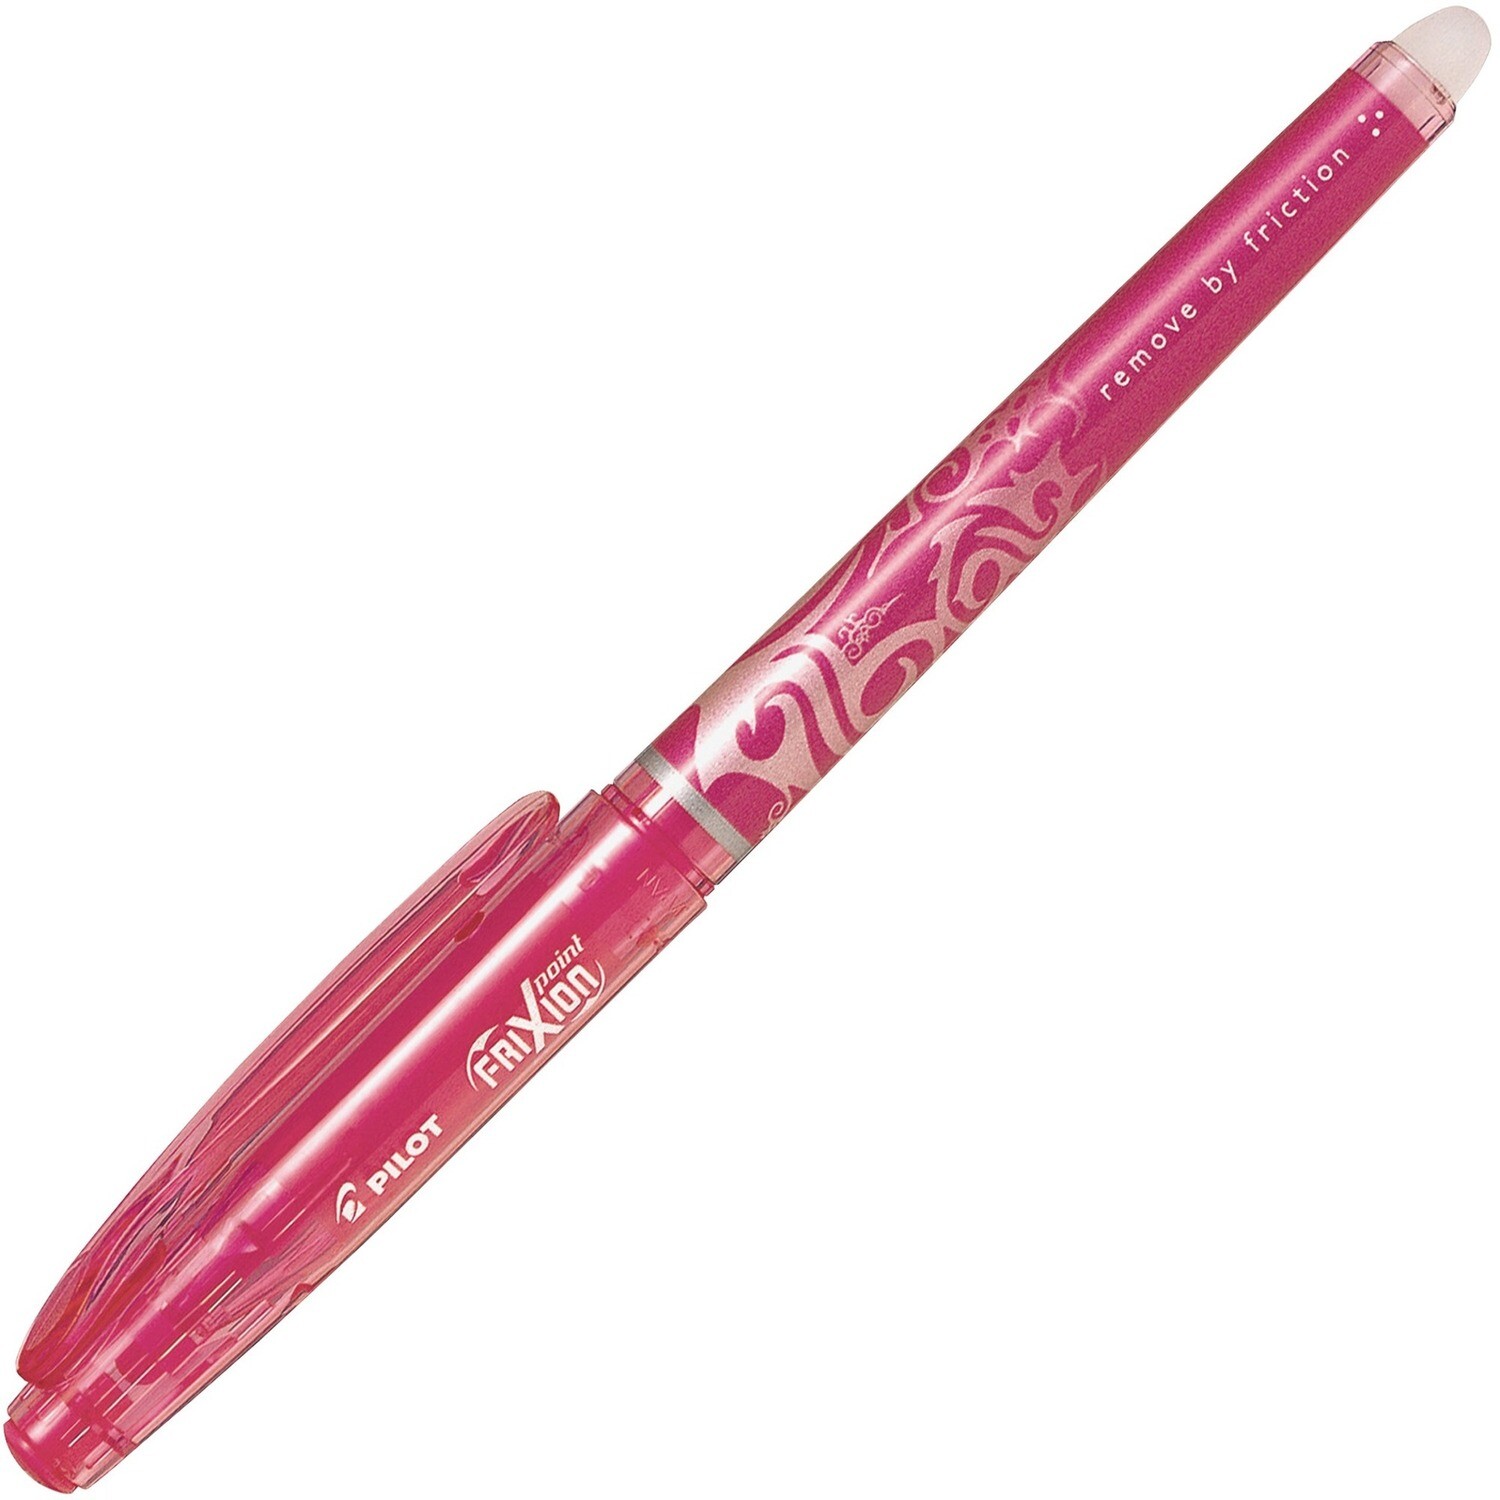 Pen, Erasable, Gel Rollerball, FriXion Pink, Box of 12, 0.5 Mm,  Refillable